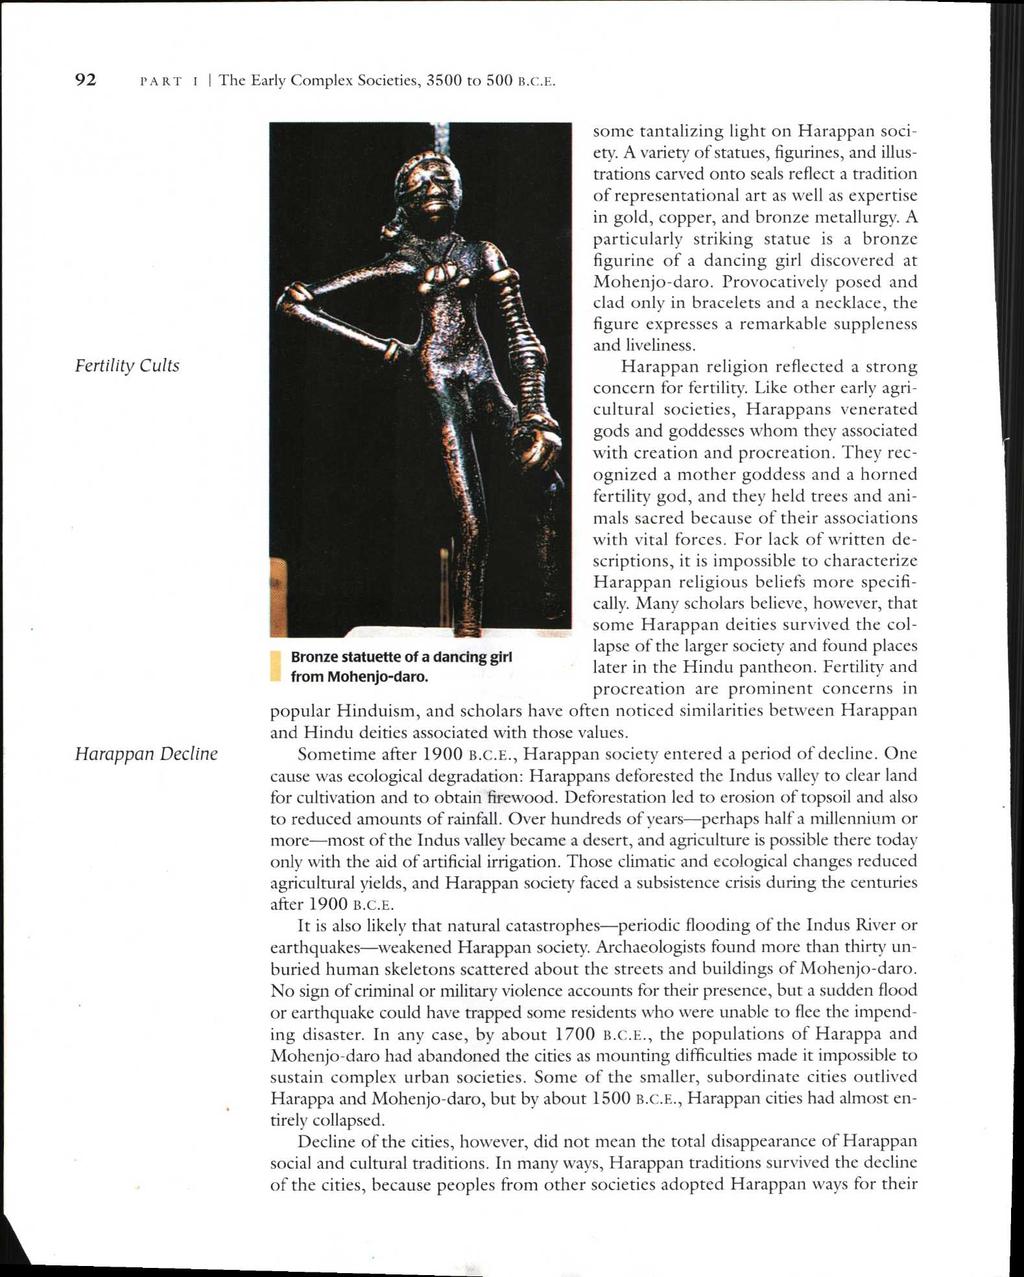 92 PART i I The Early Complex Societies, 3500 to 500 B.C.E. Fertility Cults Harappan Decline Bronze statuette of a dancing girl from Mohenjo-daro. some tantalizing light on Harappan society.